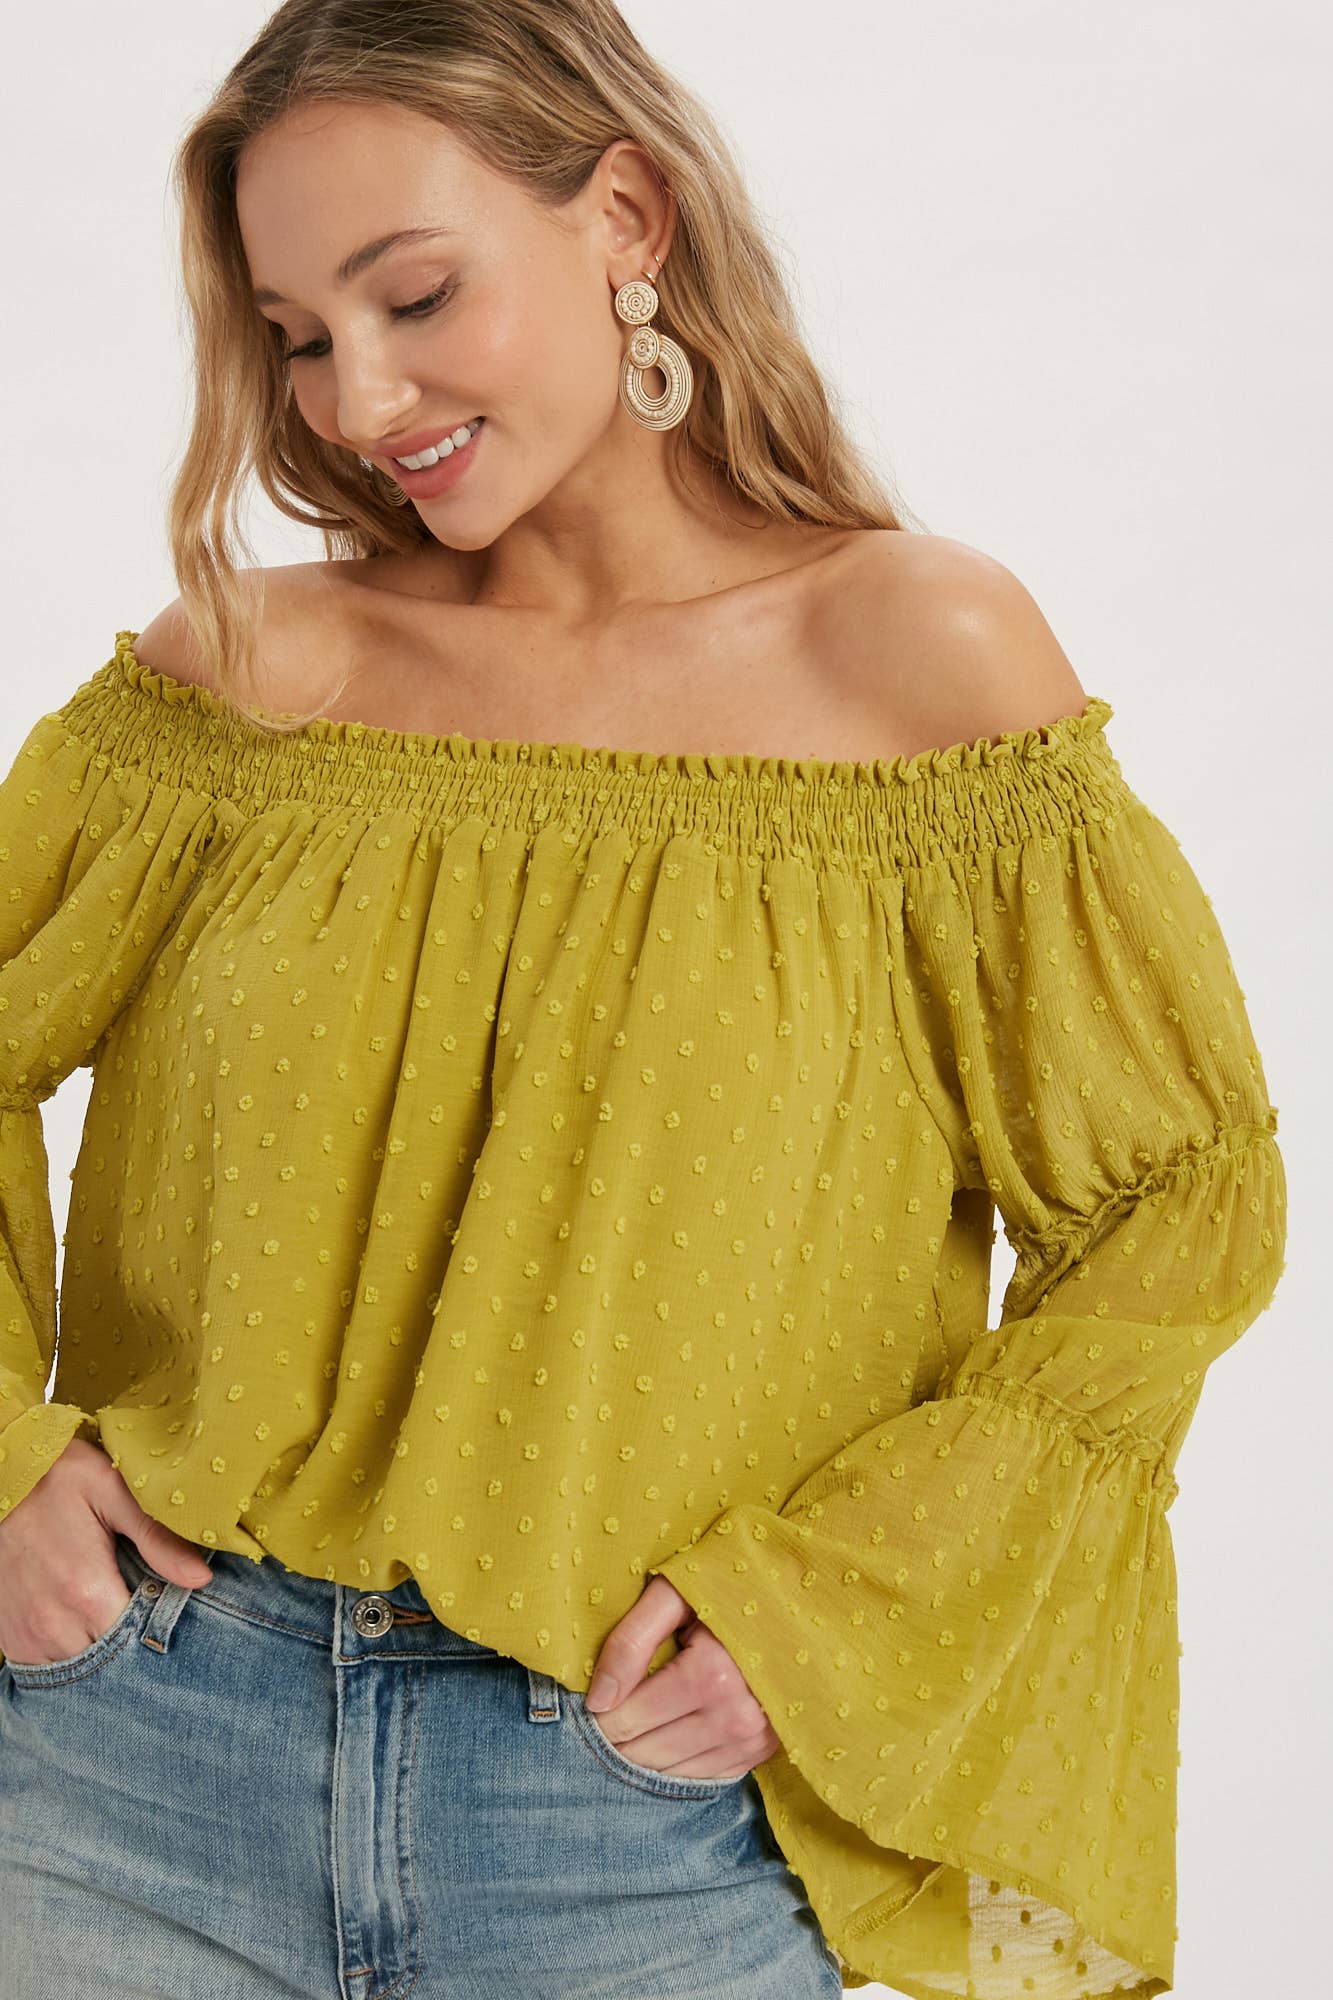 Chartreuse Off The Shoulder Top - Salud HTX